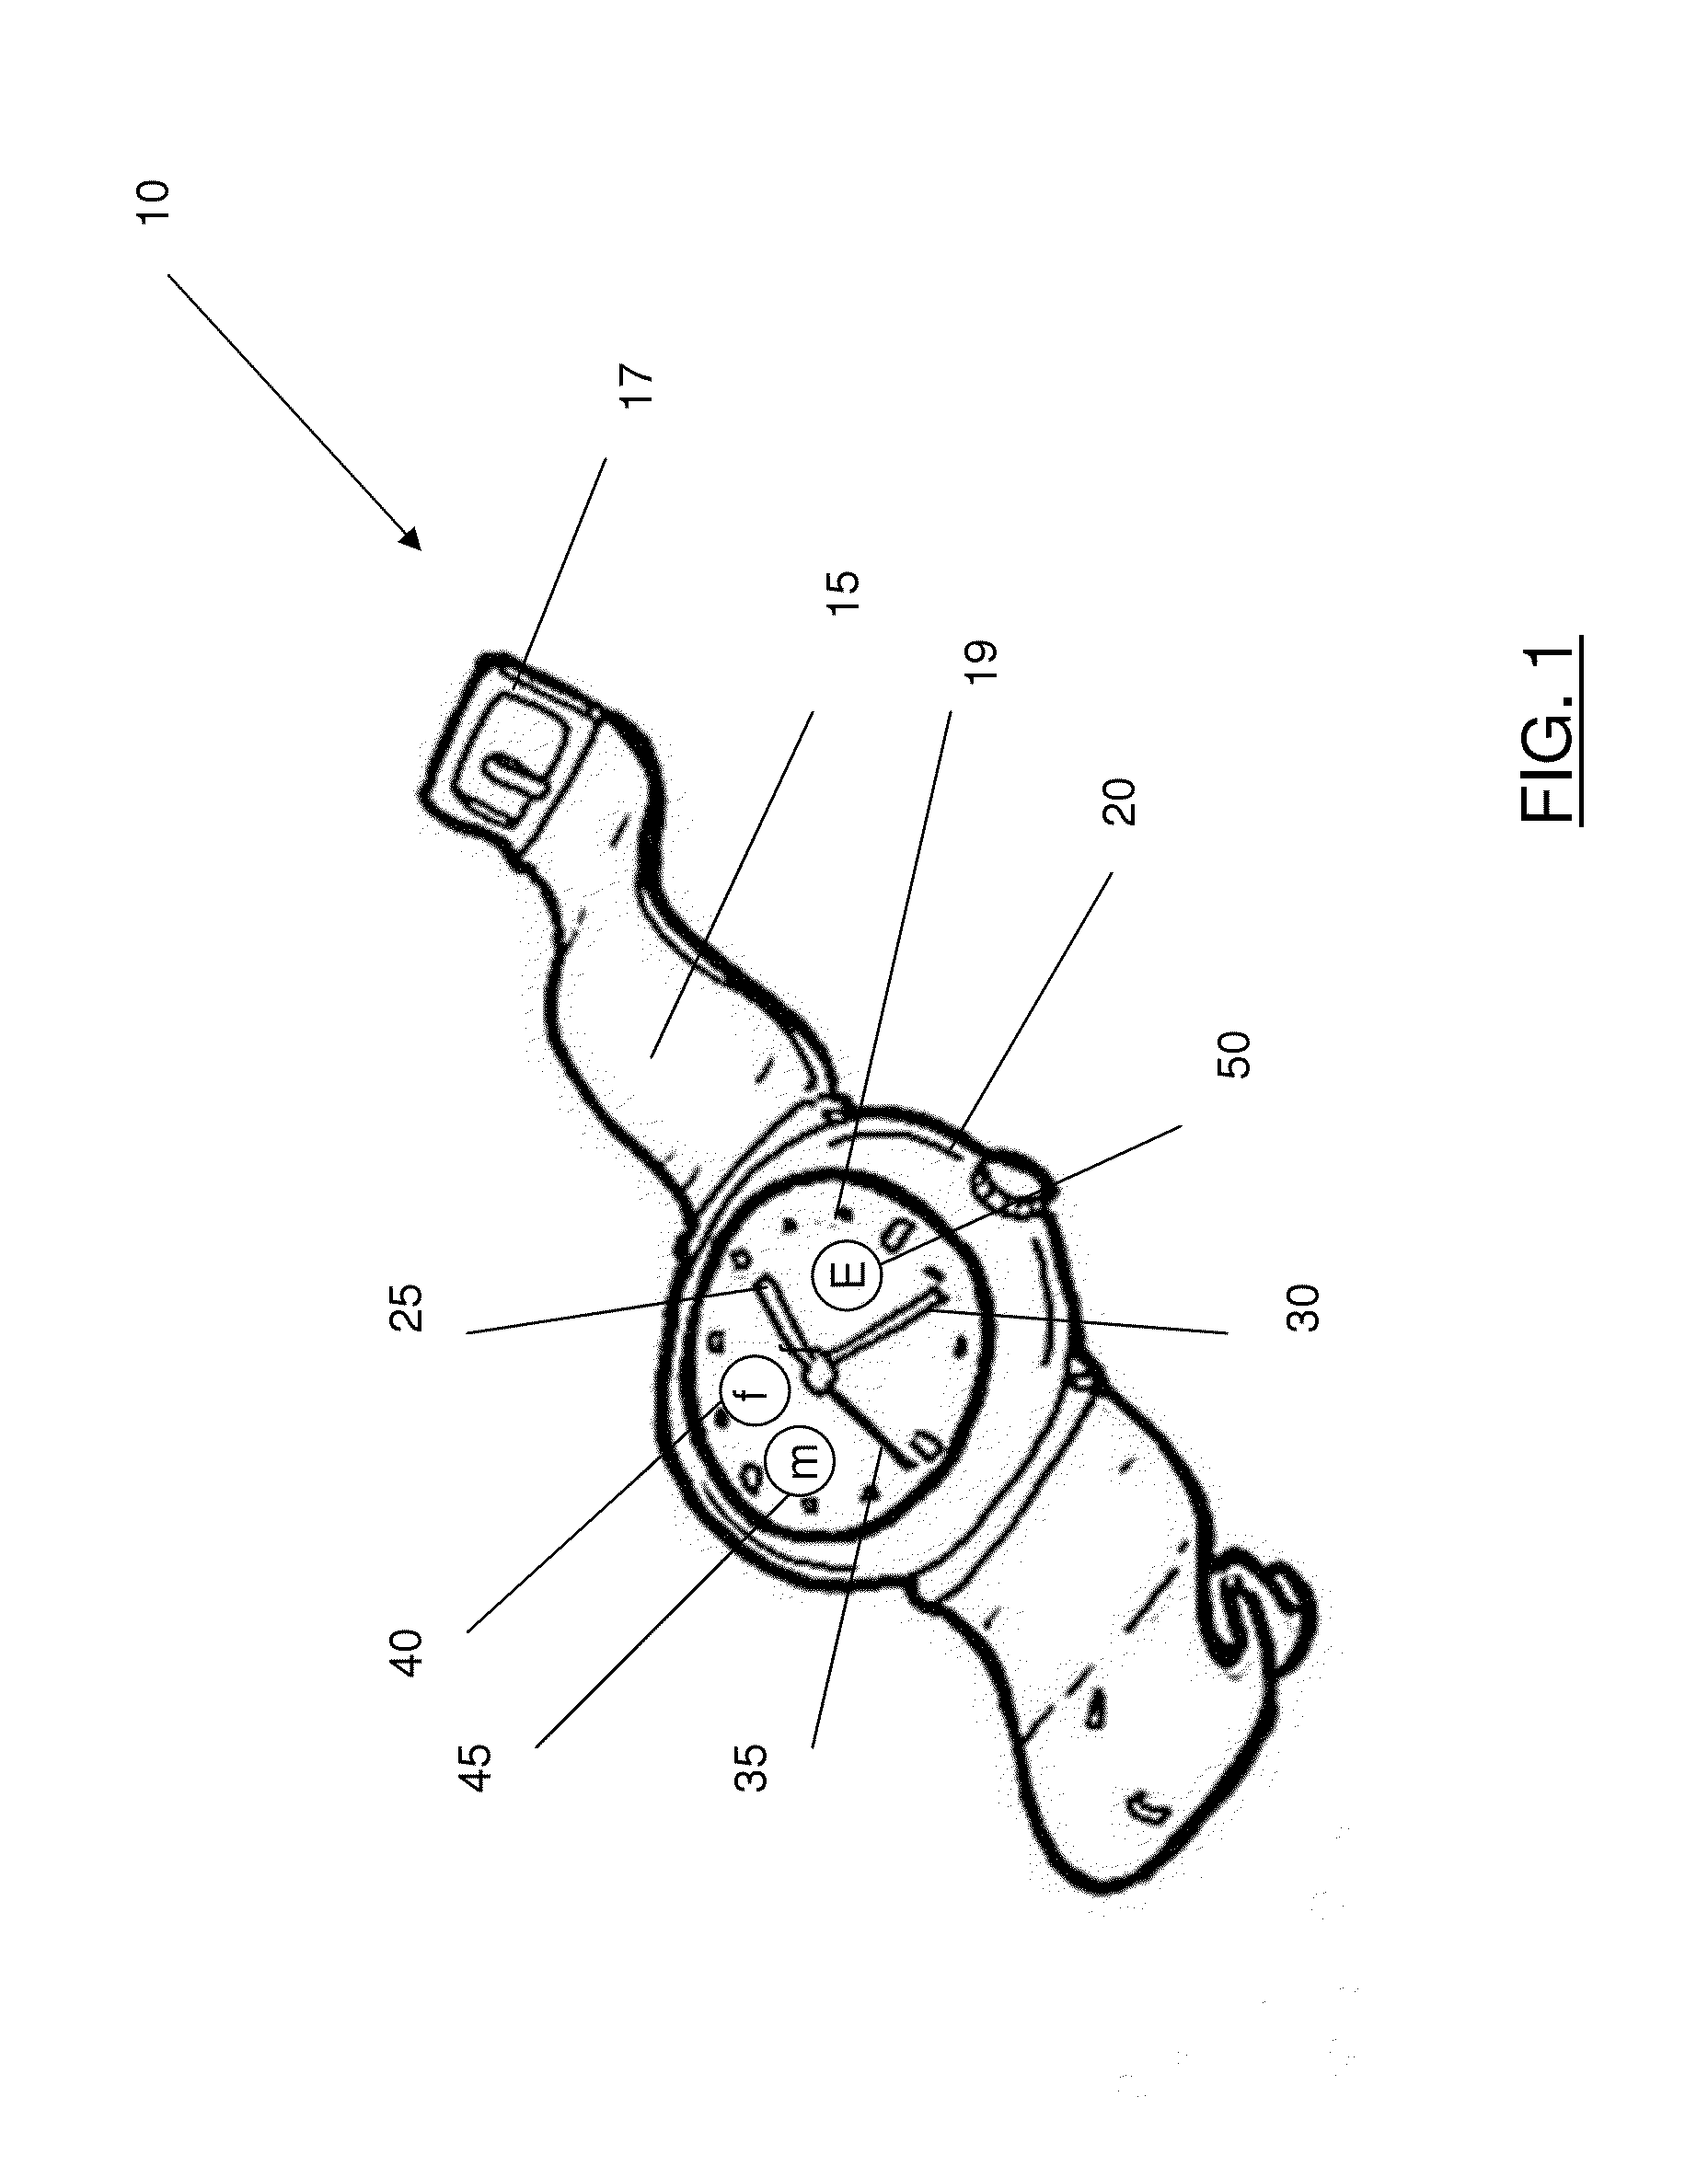 Personal locator device for a child having an integrated mobile communication device that qualifies to be carried in an educational setting